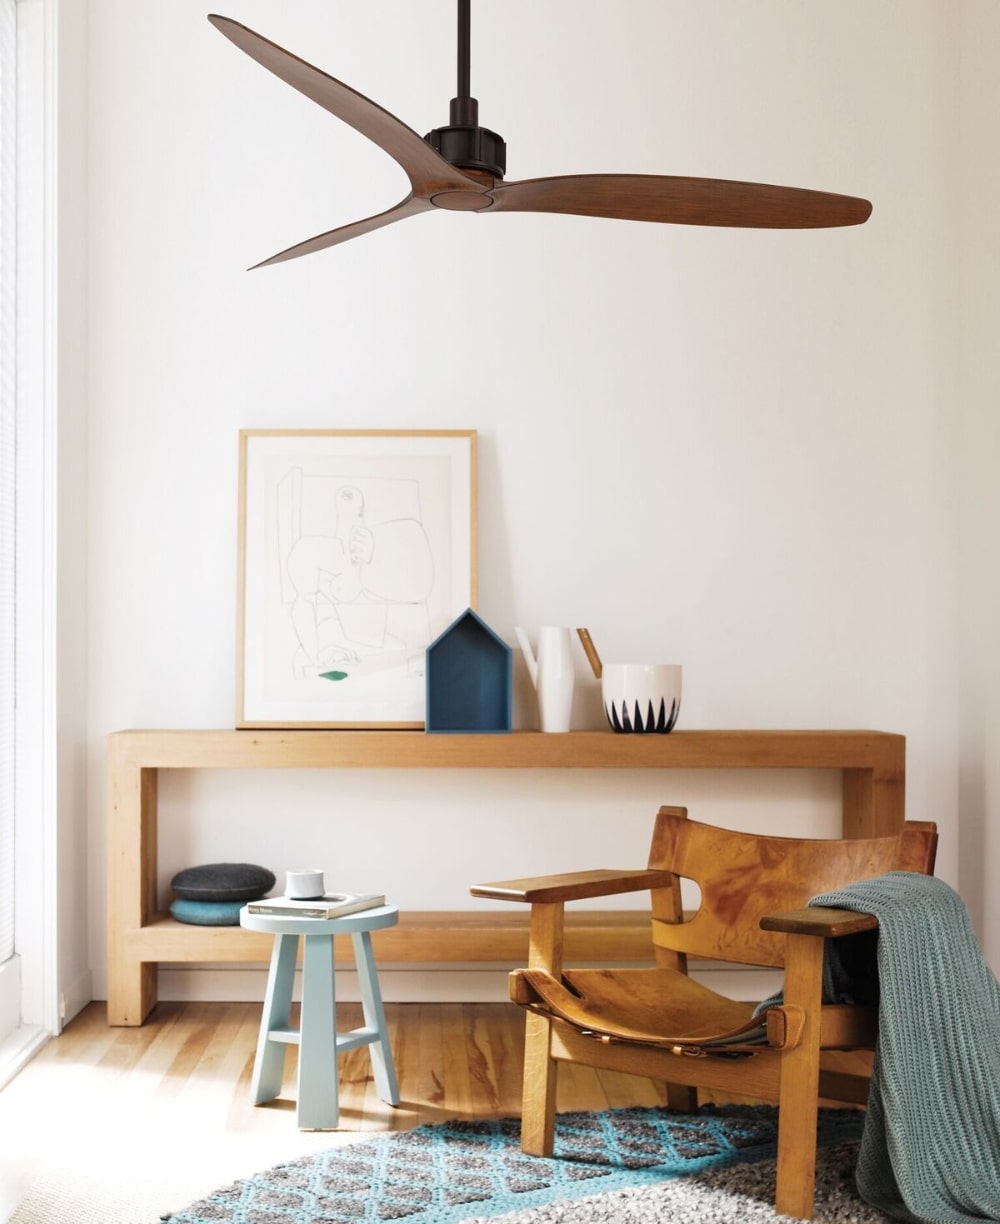 Spitfire Ceiling Fan for A Reading Nook